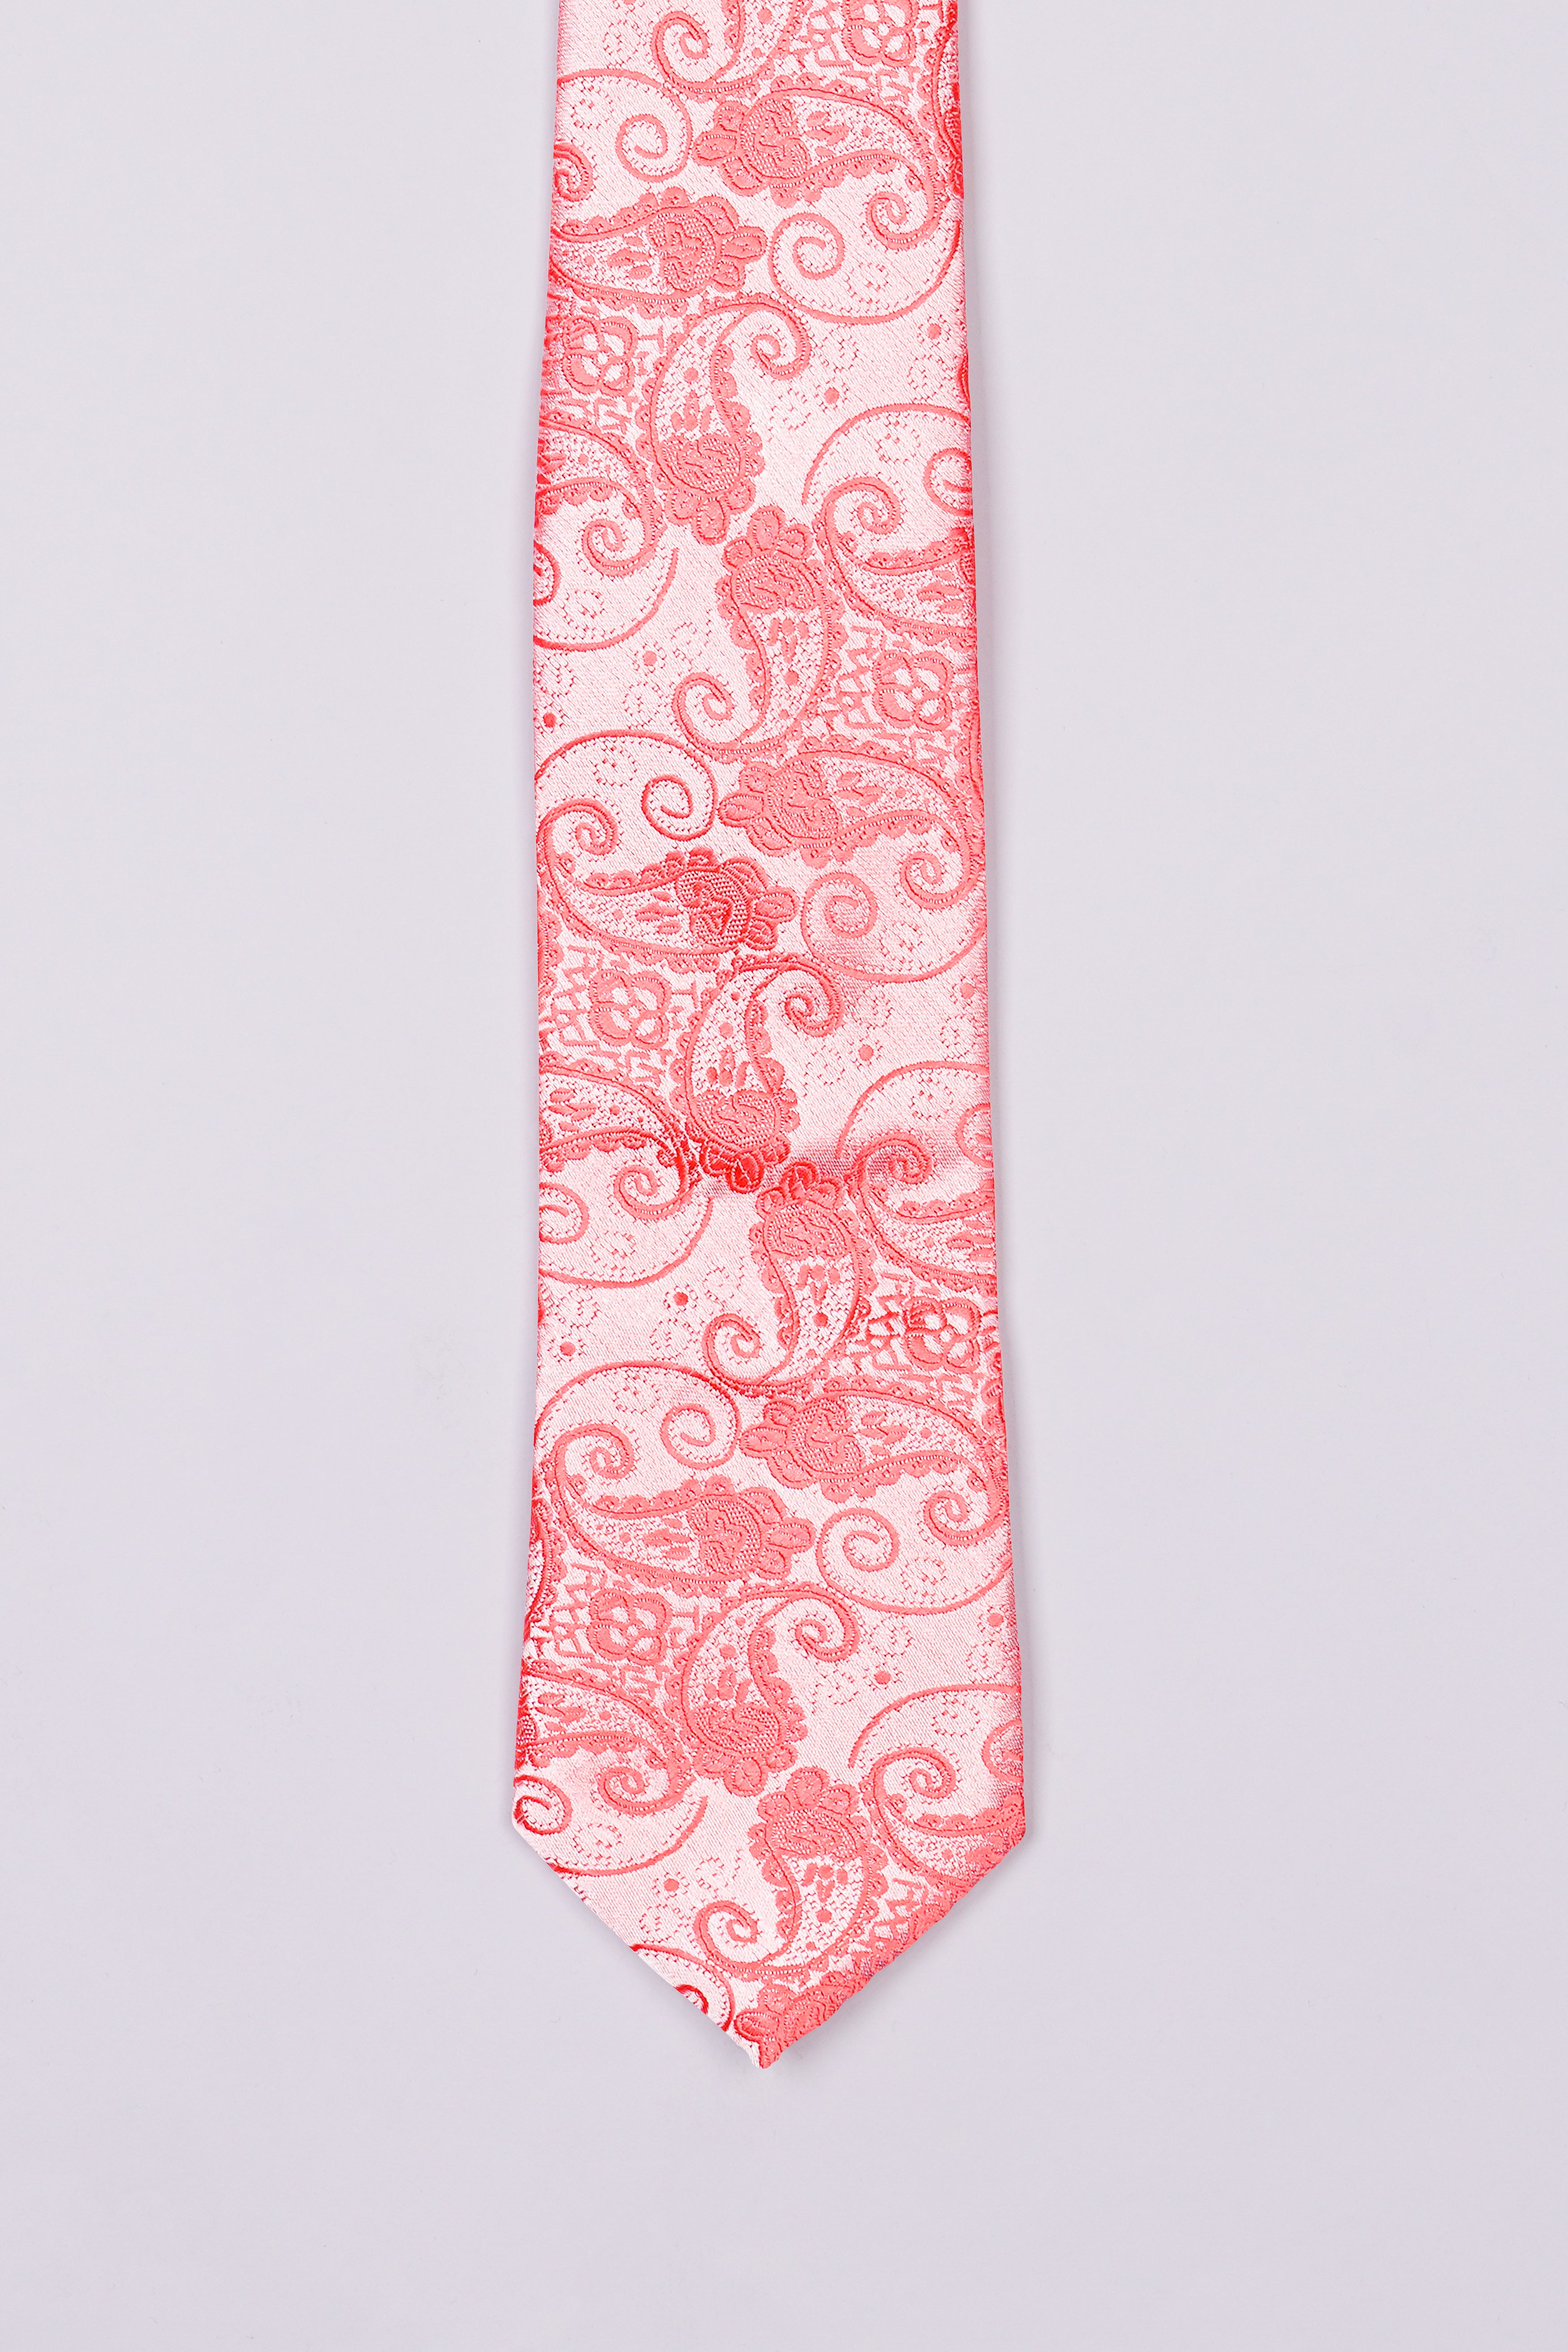 Geraldine Pink with Peach Paisley Jacquard Tie with Pocket Square TP044